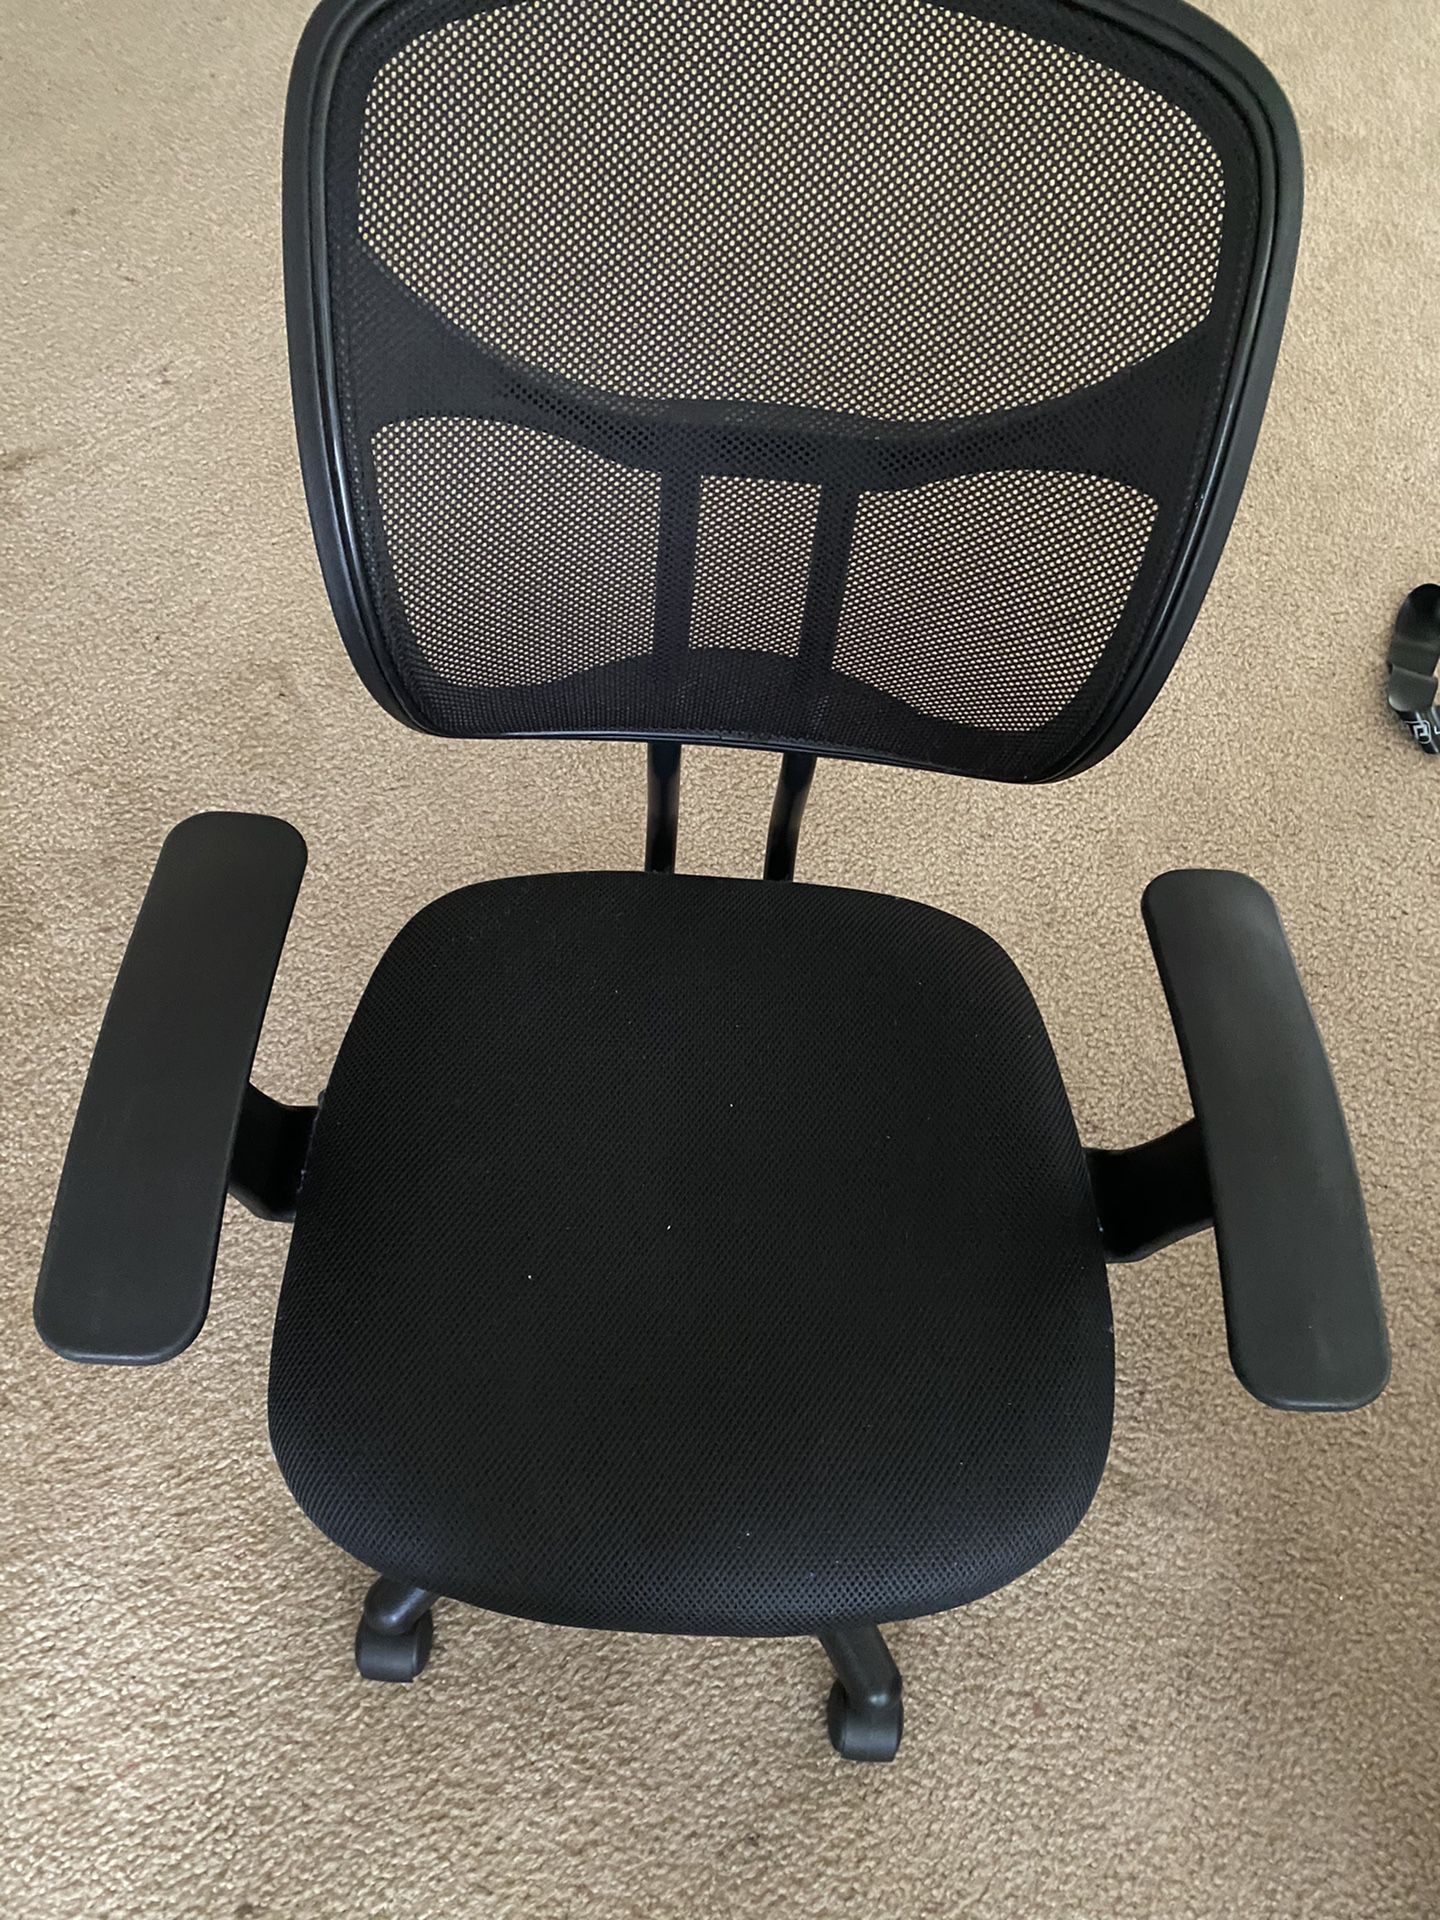 Free computer chair must come pick up Kirkman Conroy area today only